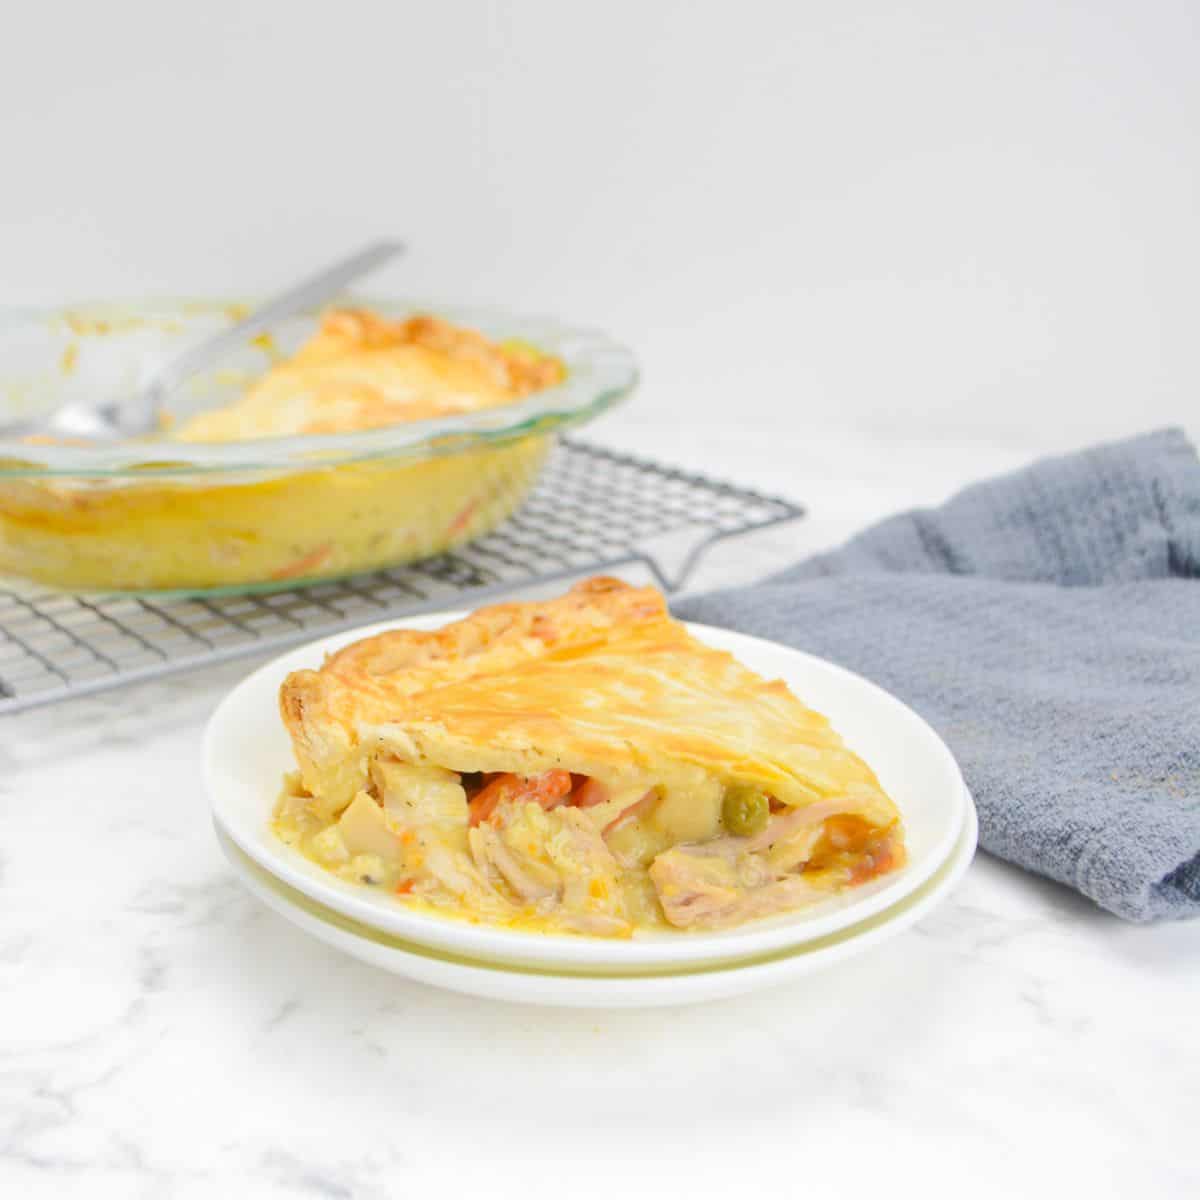 Single slice of Weight Watchers Chicken Pot pie sits on top of a white plate next to a grey napkin. In the background is a cooling rack with the casserole dish and a large spoon.